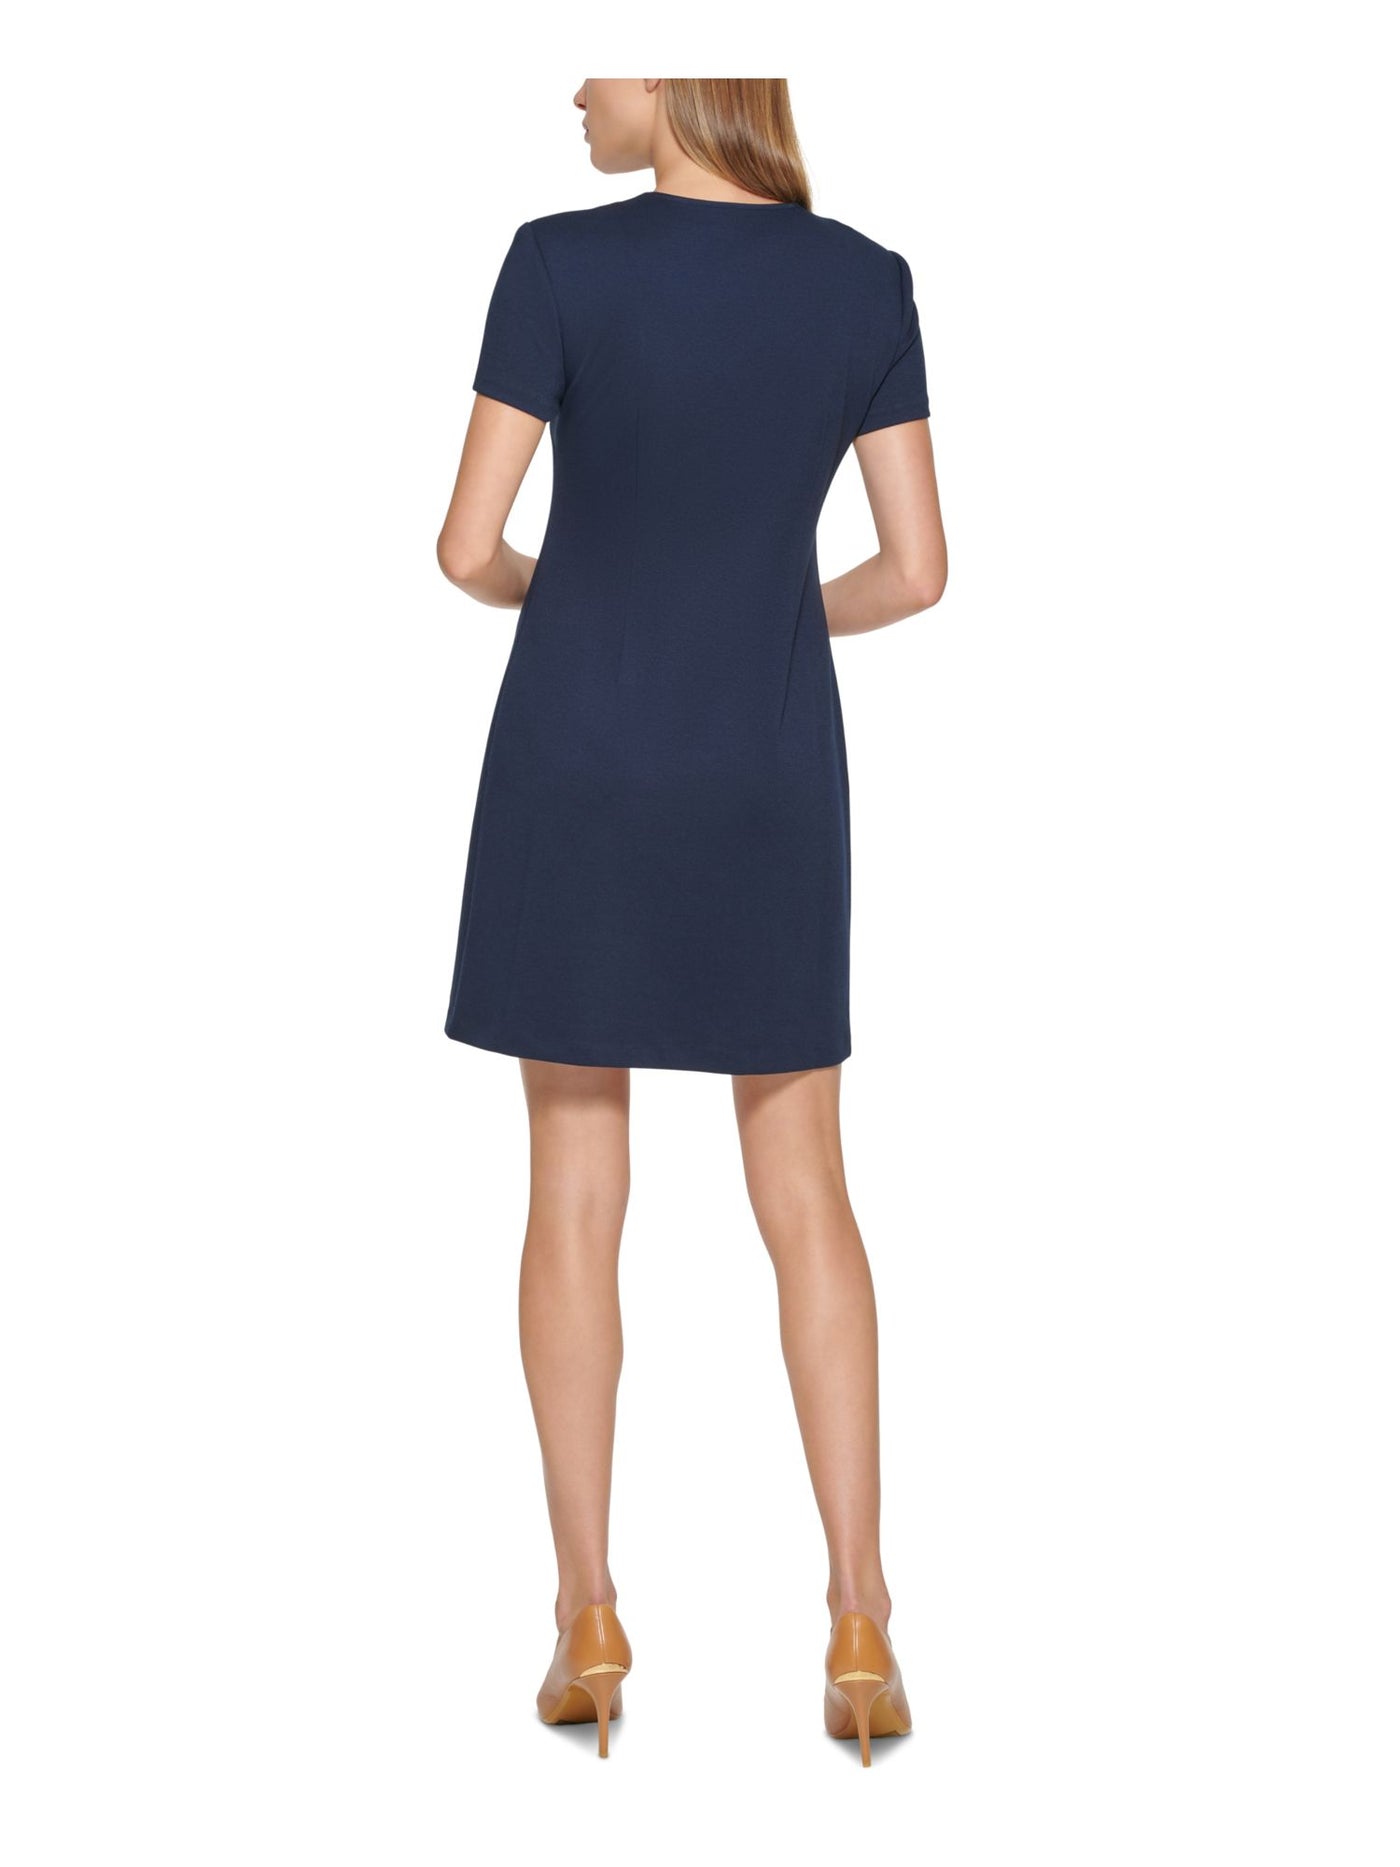 CALVIN KLEIN Womens Navy Stretch Zippered Shoulder Pads Short Sleeve Jewel Neck Above The Knee Party Sheath Dress 8